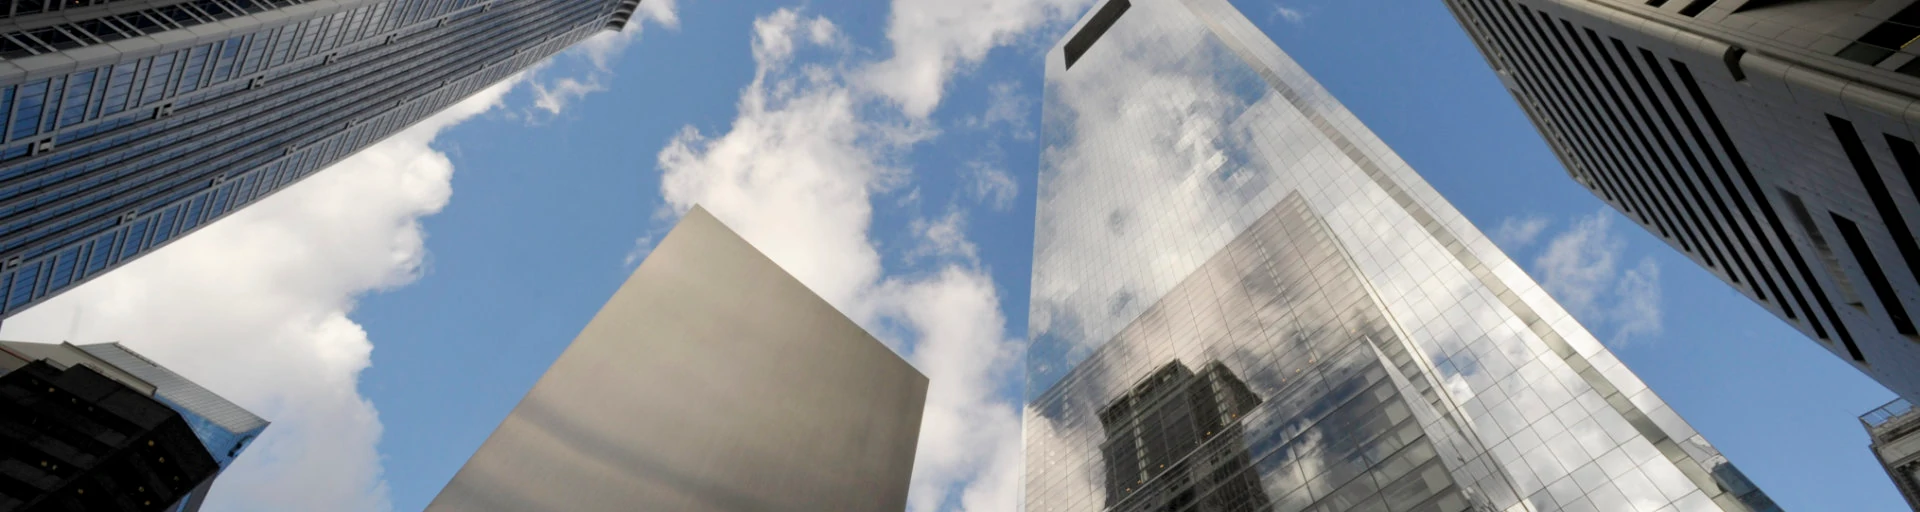 Our aluminum extrusions are defining Americas skyline